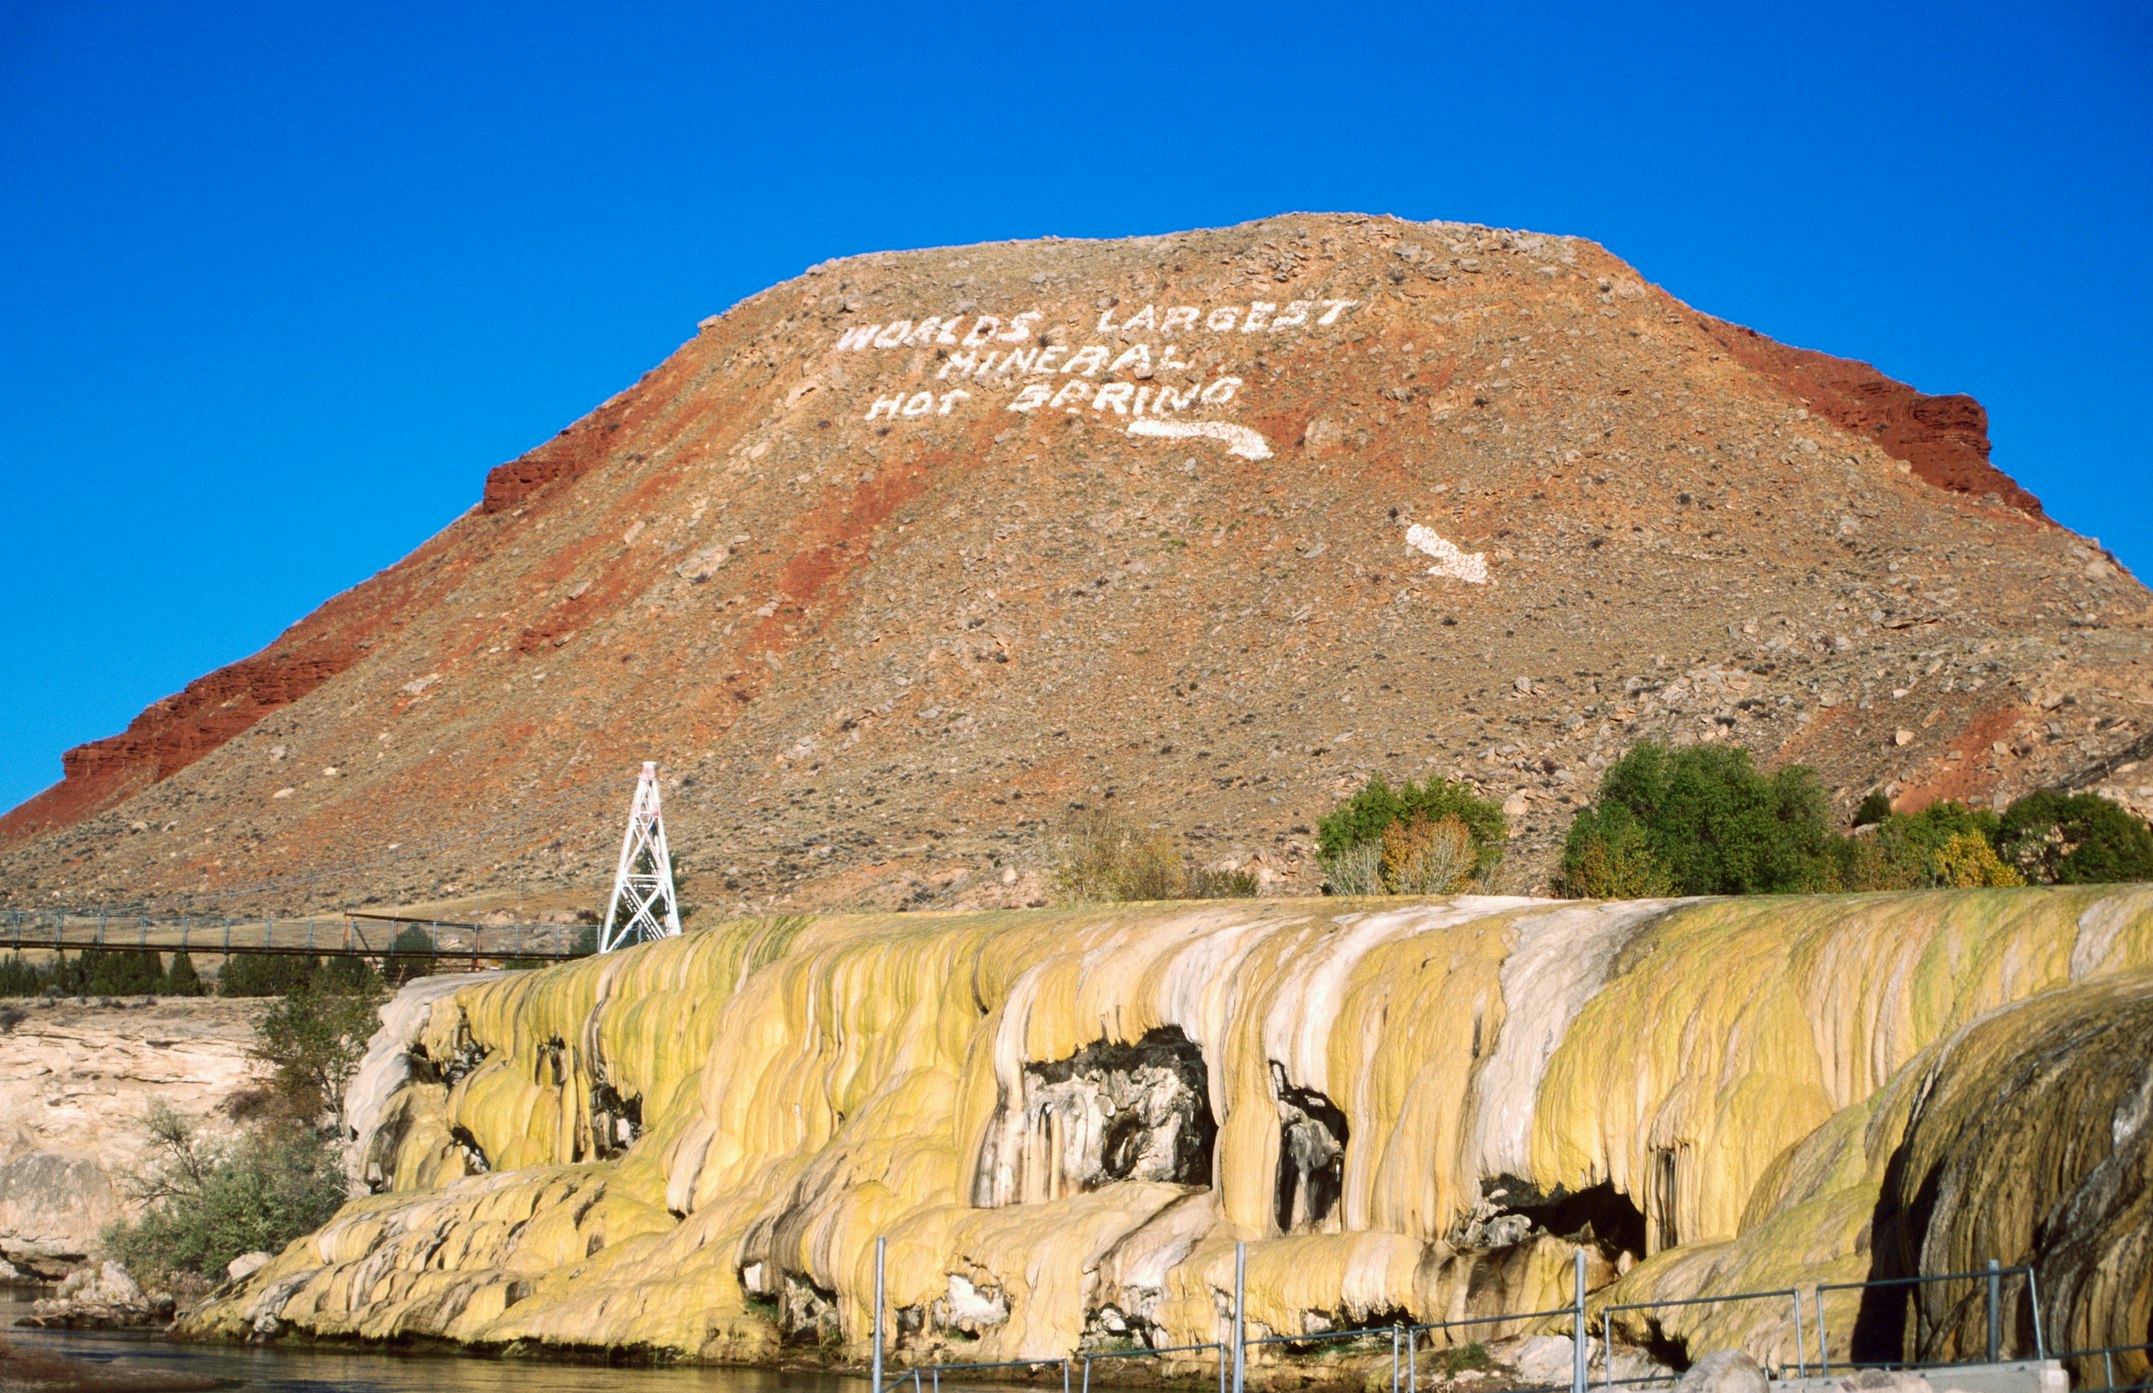 The words "World's largest mineral hot spring" are painted onto red rock above thermal pools at Hot Springs State Park in Wyoming